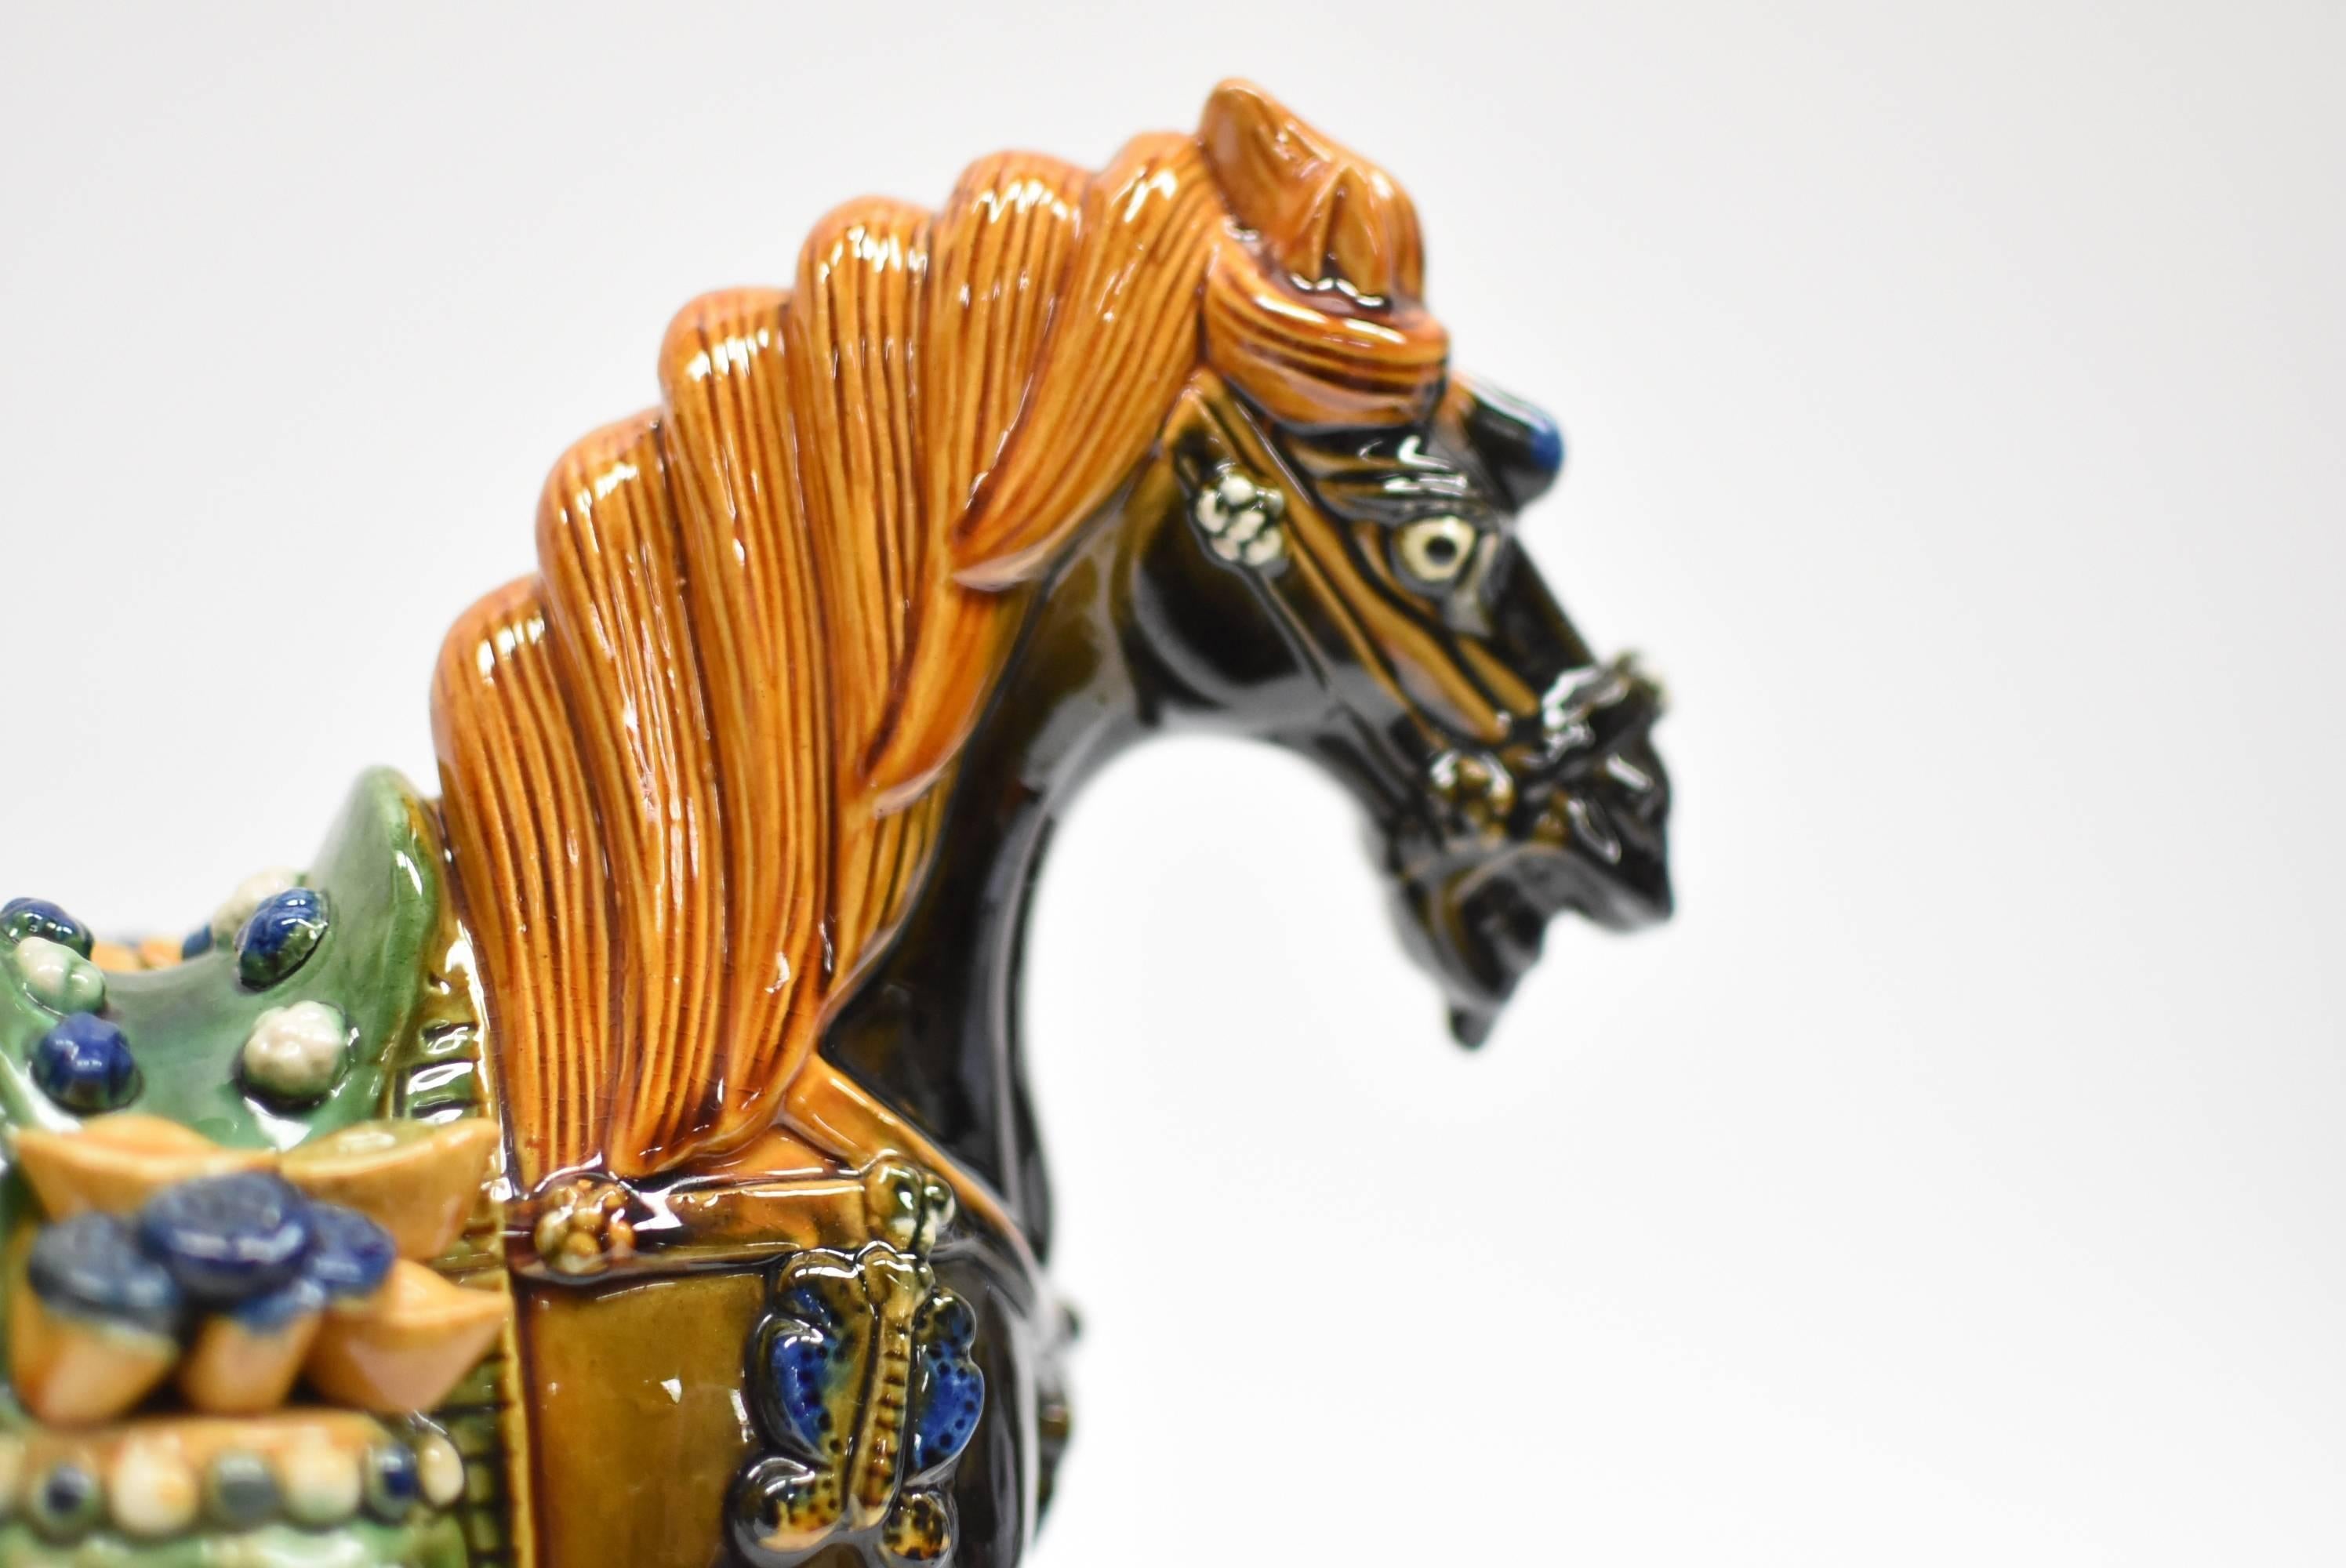 Black Chinese Pottery Horse, with Money Bag 8